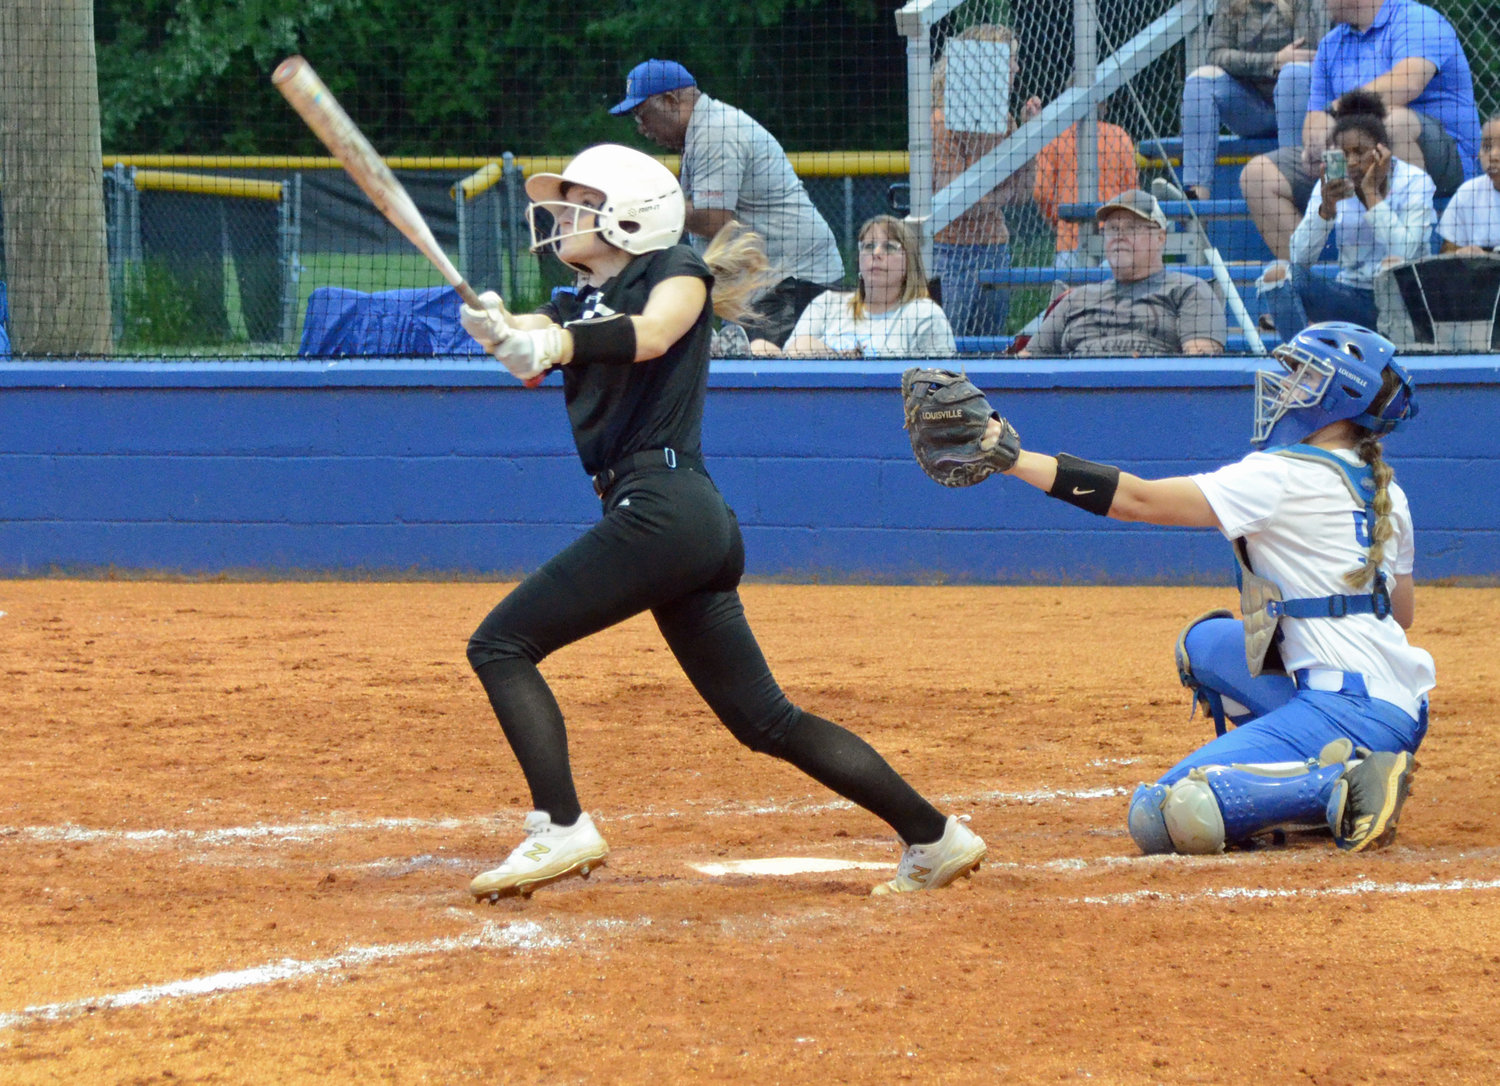 Jayli Childress had a pair of hits and two RBIs in the Lady Bulldogs’ 13-8 loss at Lewisburg Tuesday night.